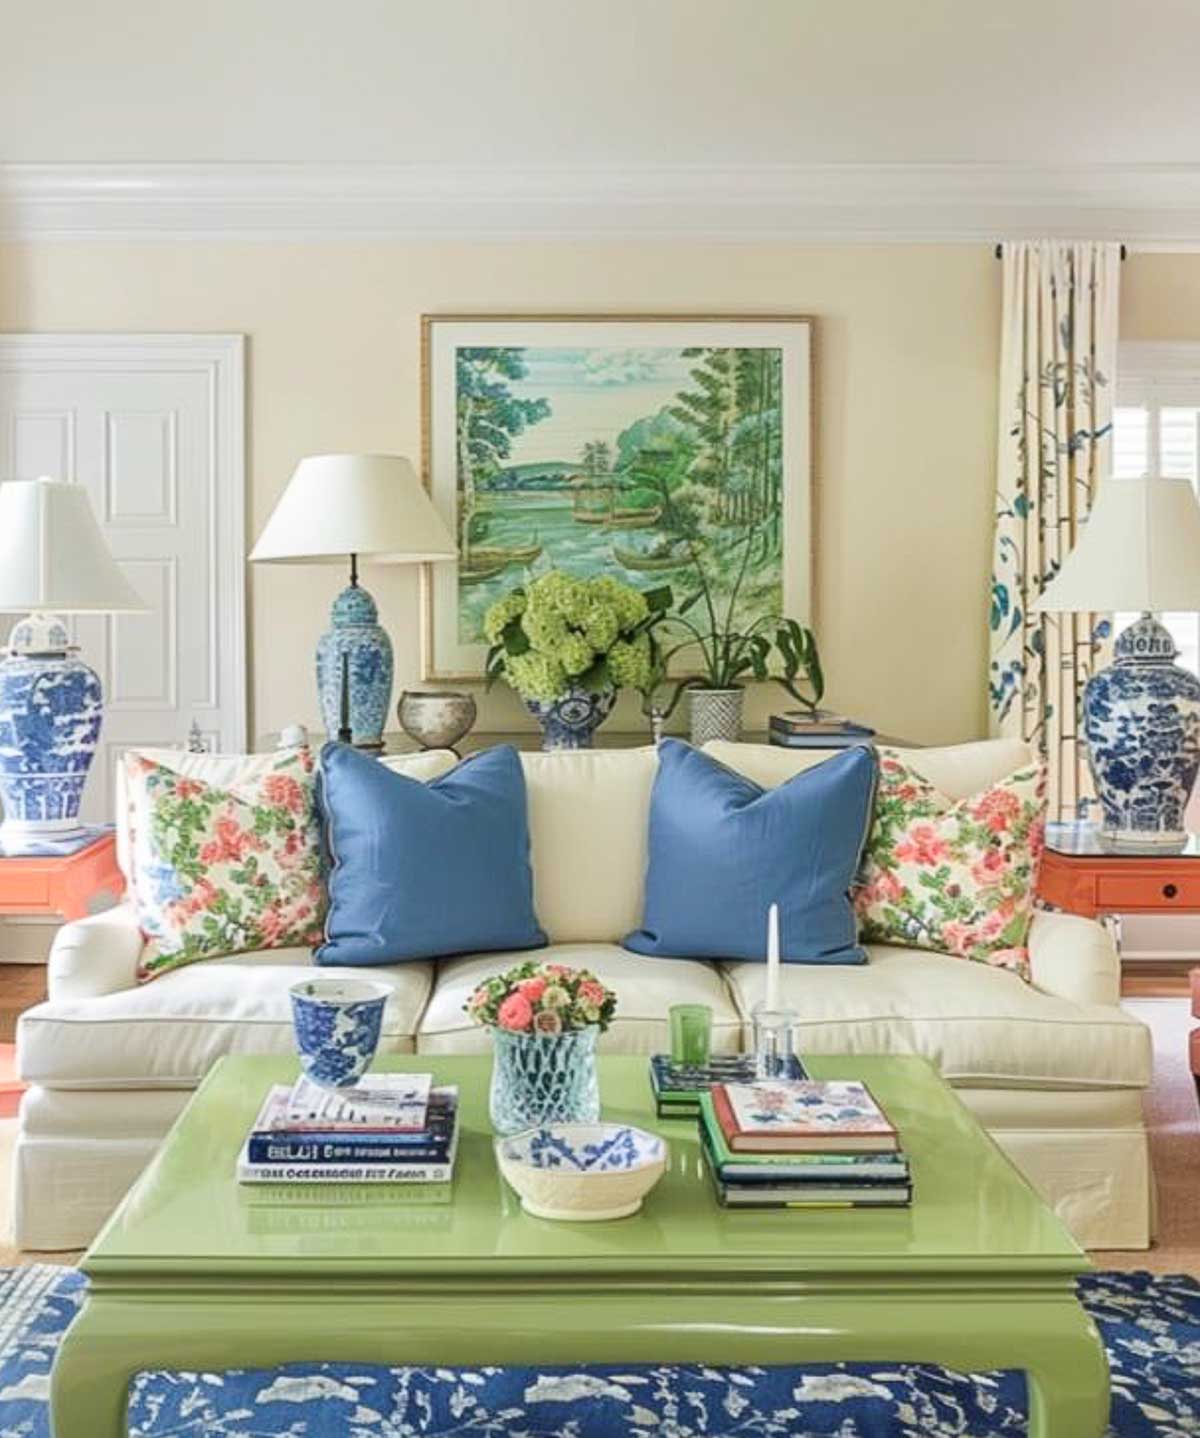 Mastering the Art of Choosing an Interior Color Scheme